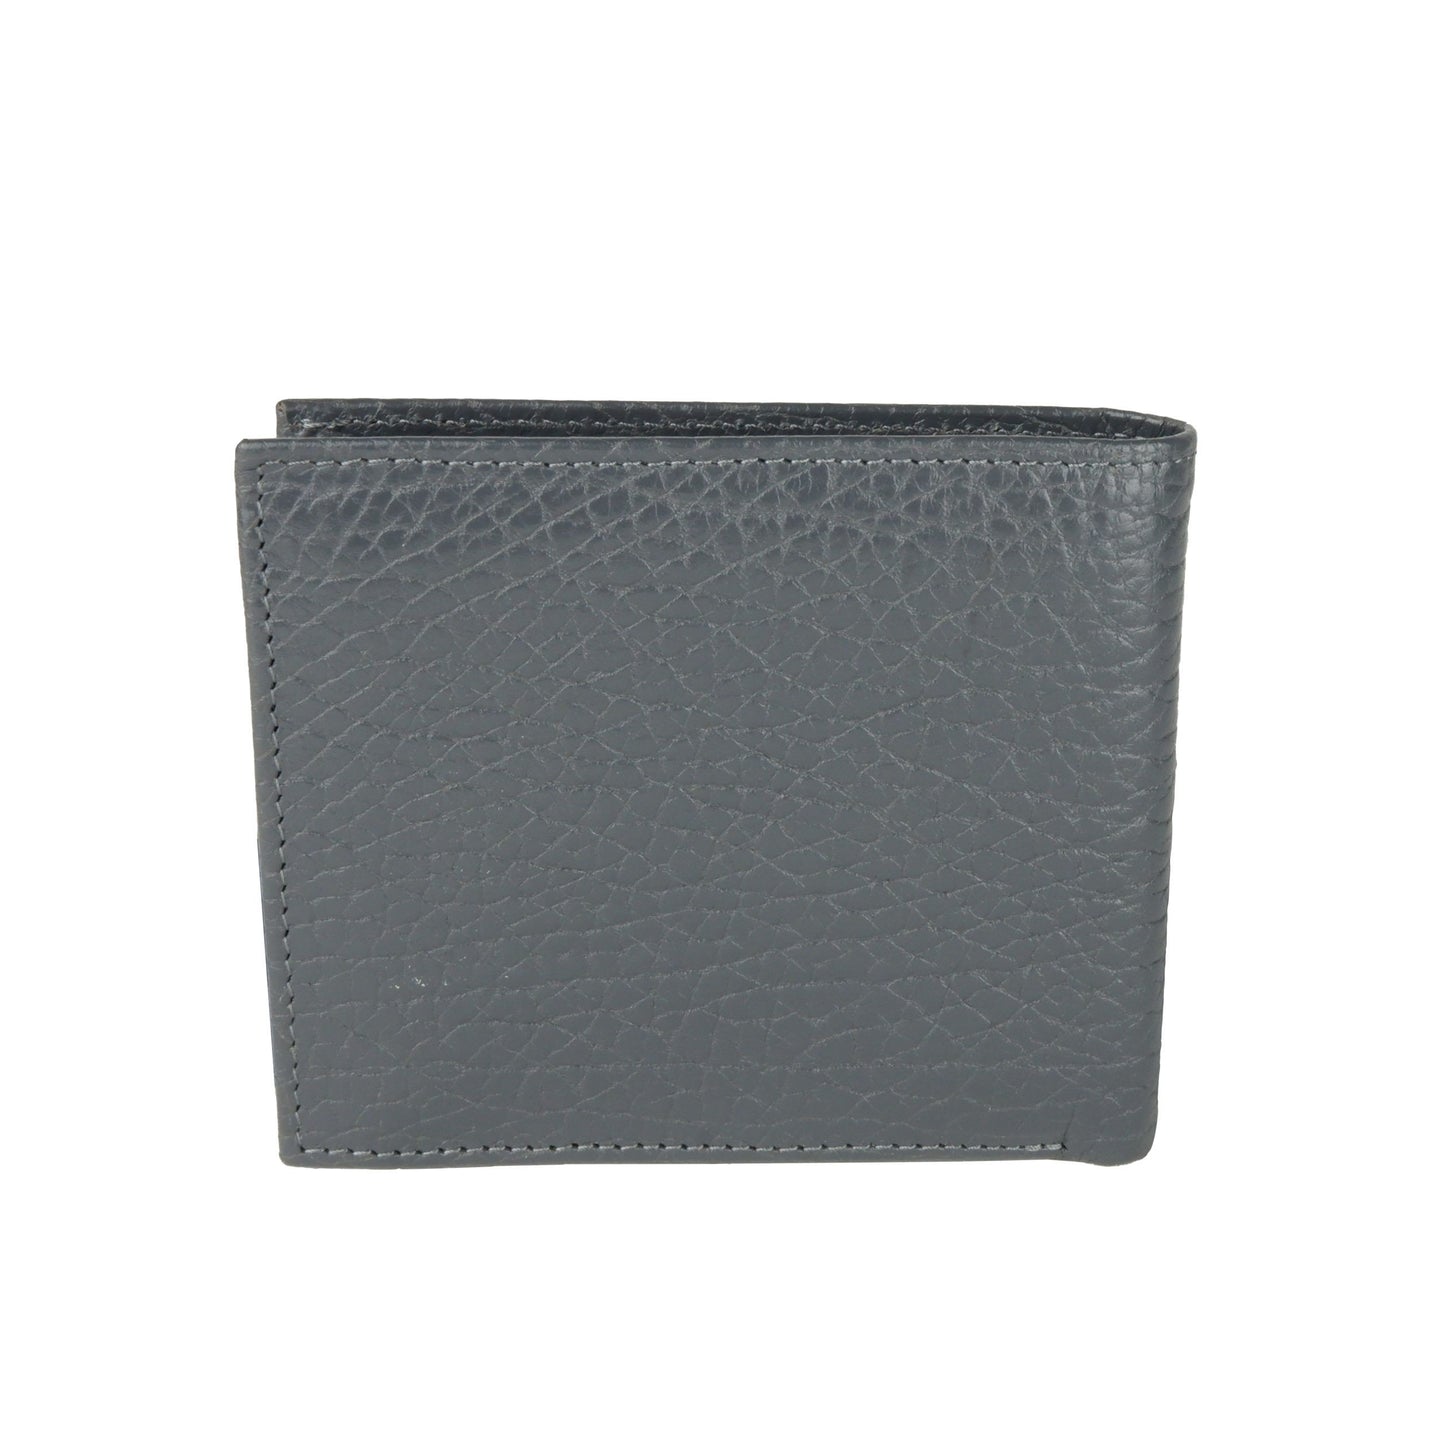 Chic Calfskin Men's Wallet with Coin Pocket